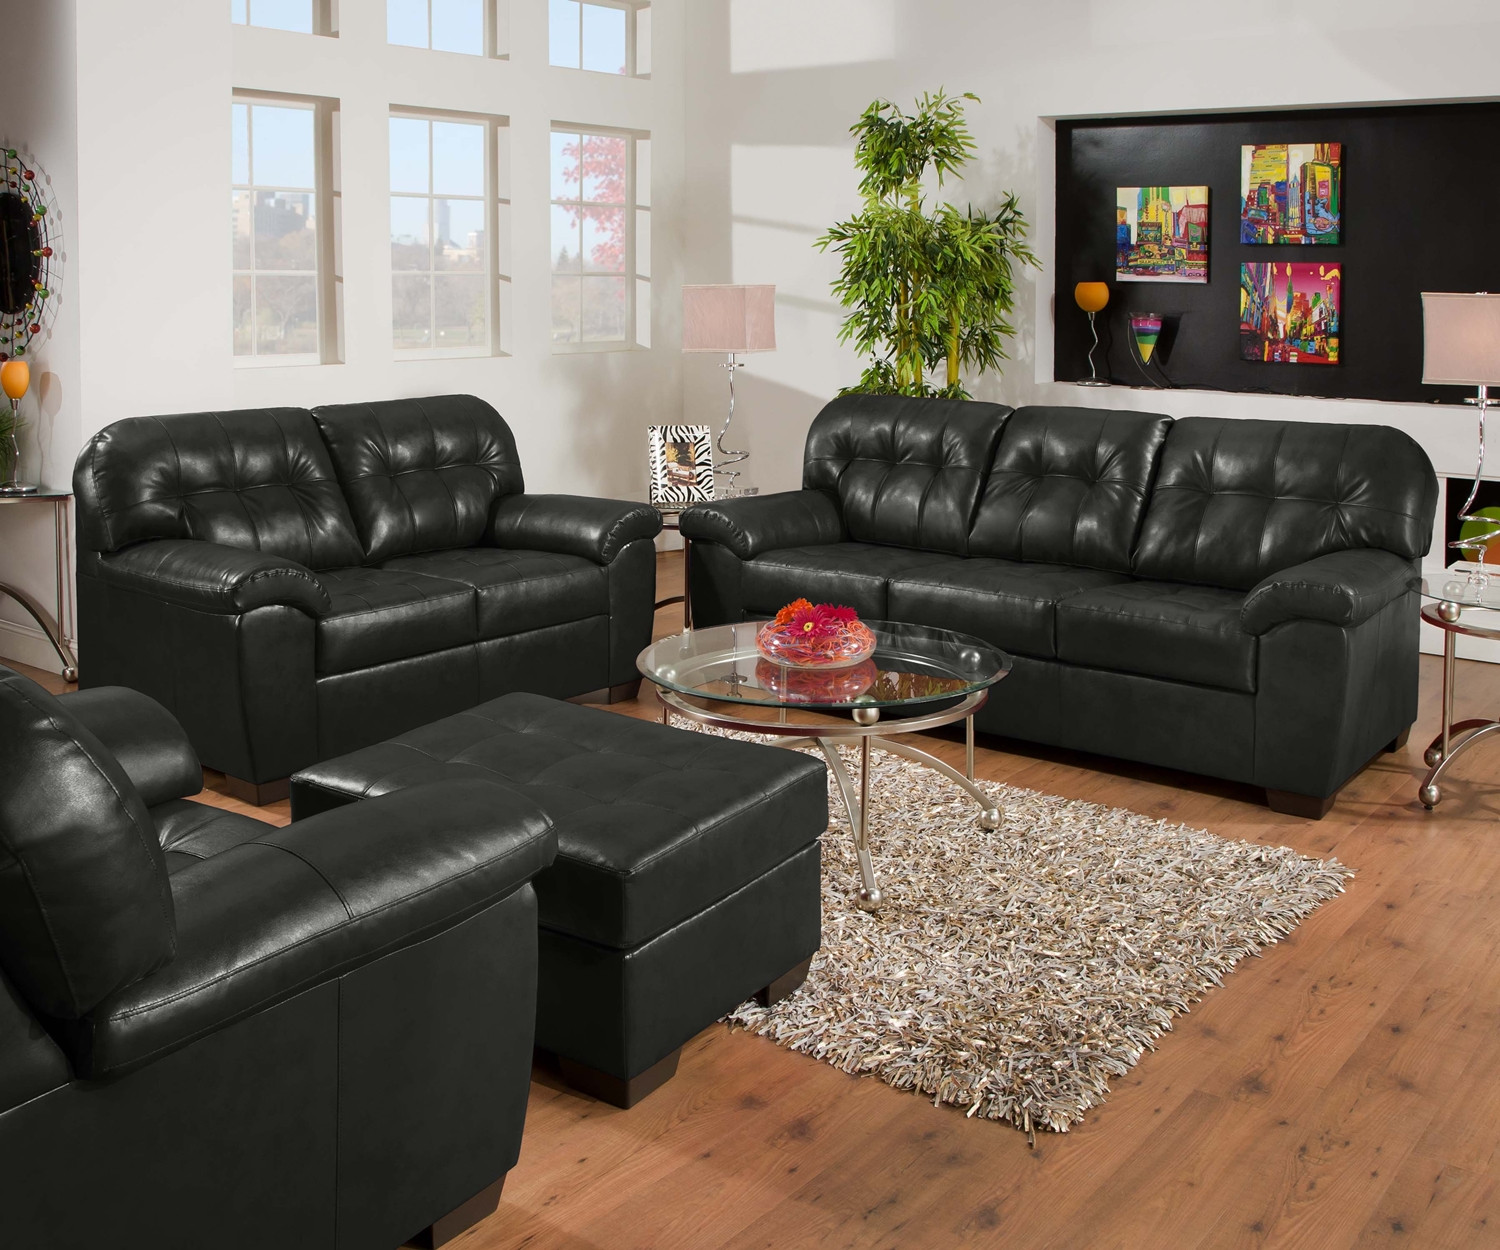 Modern Leather Living Room Set
 Soho yx Black Contemporary Tufted Bonded Leather Living